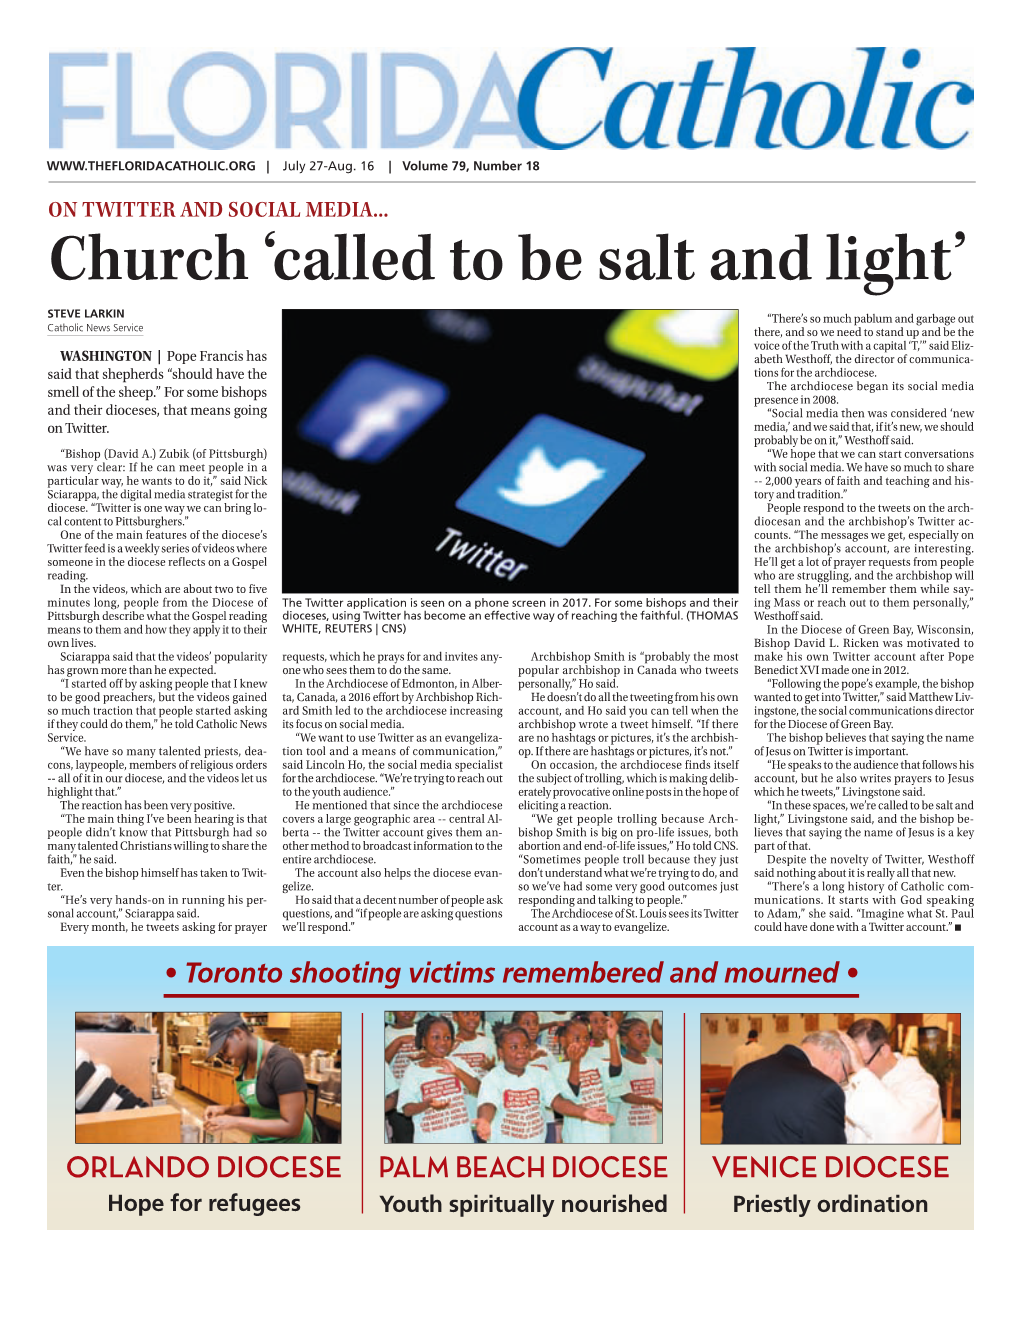 Church ‘Called to Be Salt and Light’